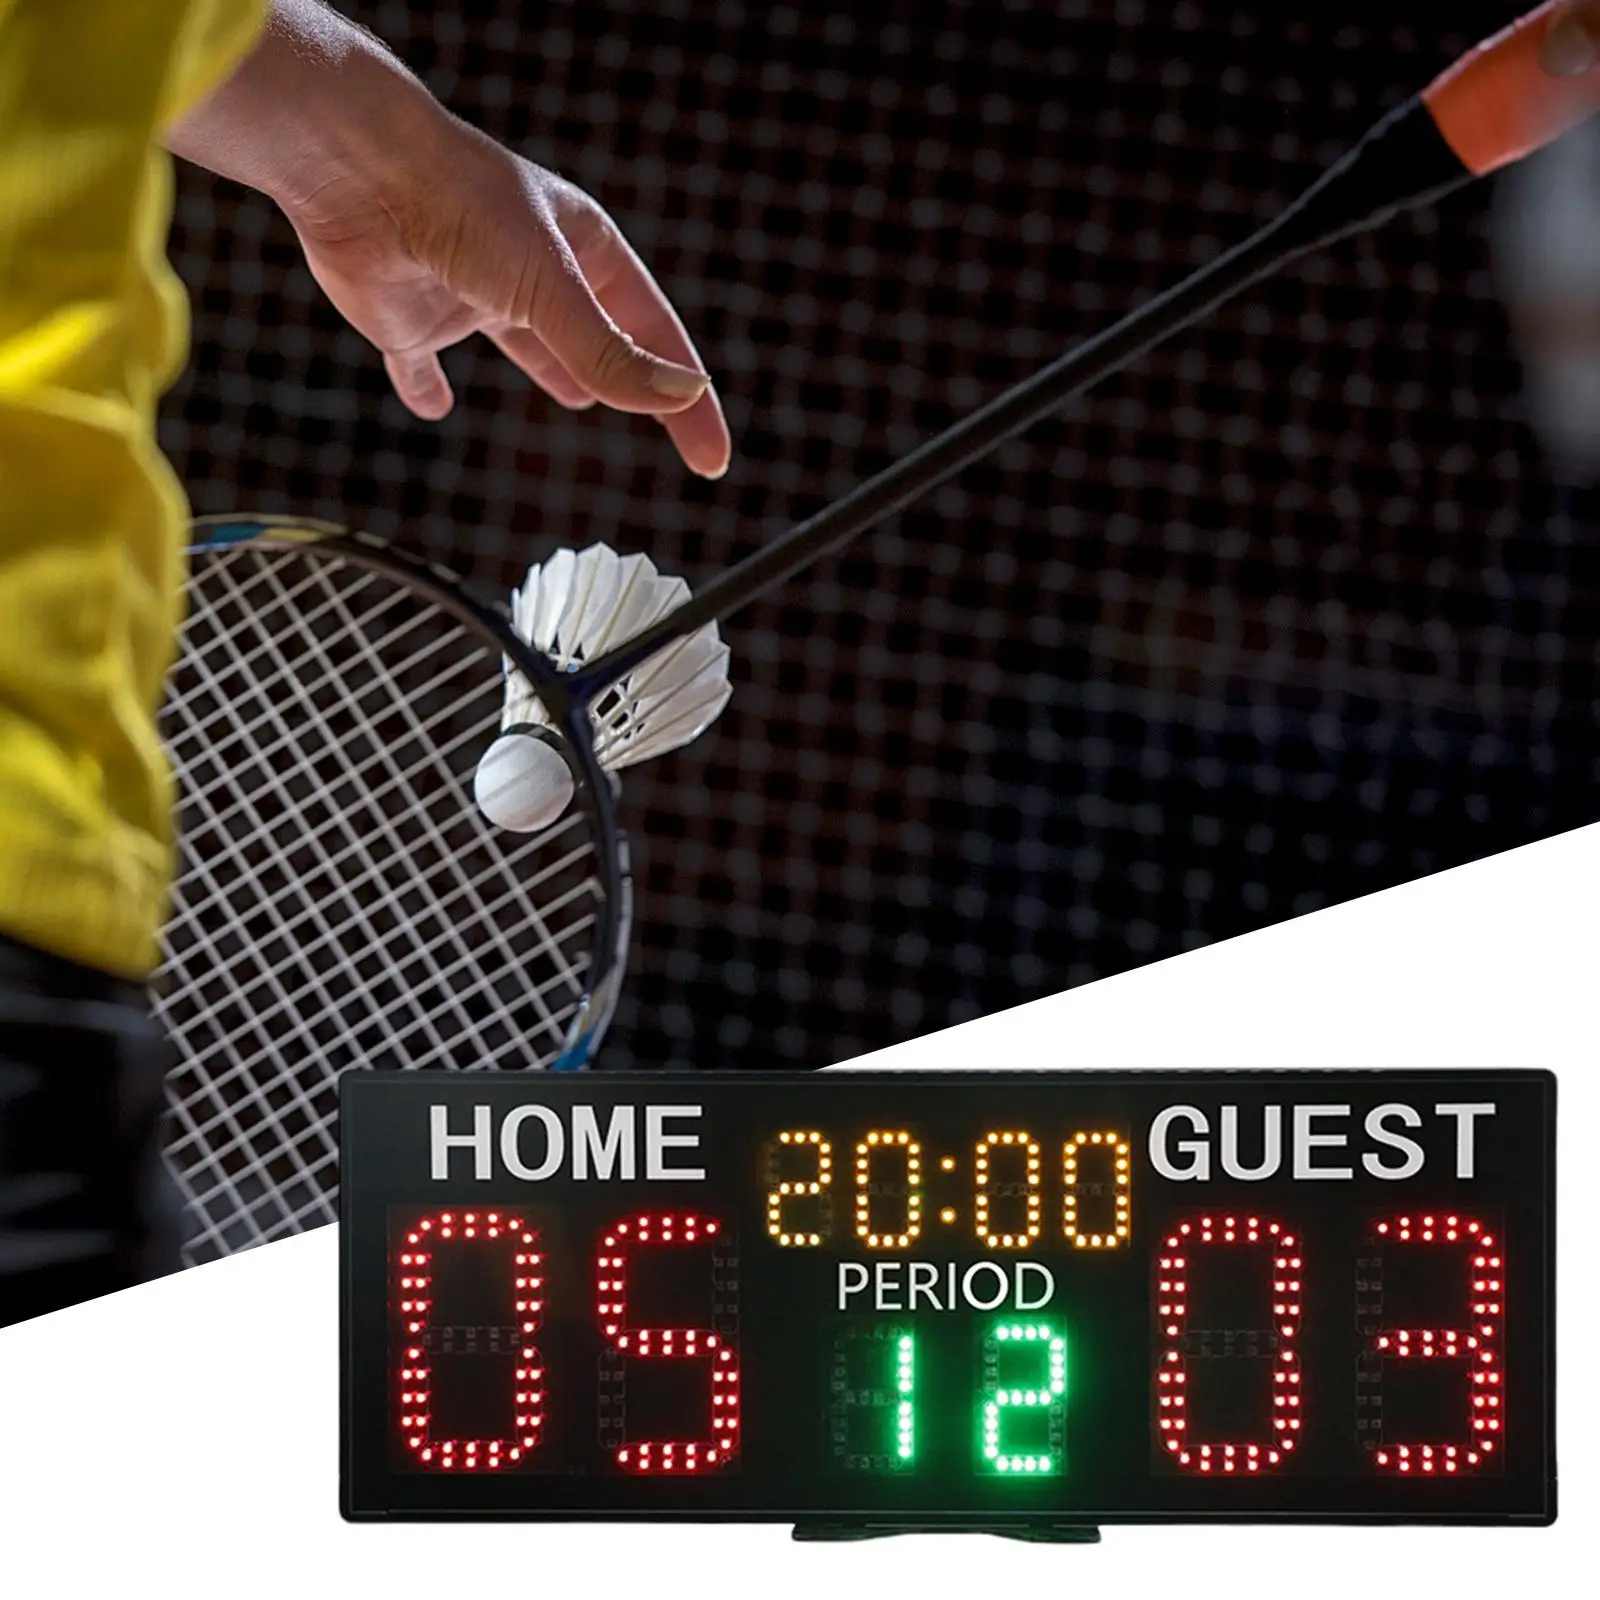 Tennis Score Keeper Tabletop Home Guest with Remote Portable Score Clock for Basketball Volleyball Football Table Tennis Outdoor